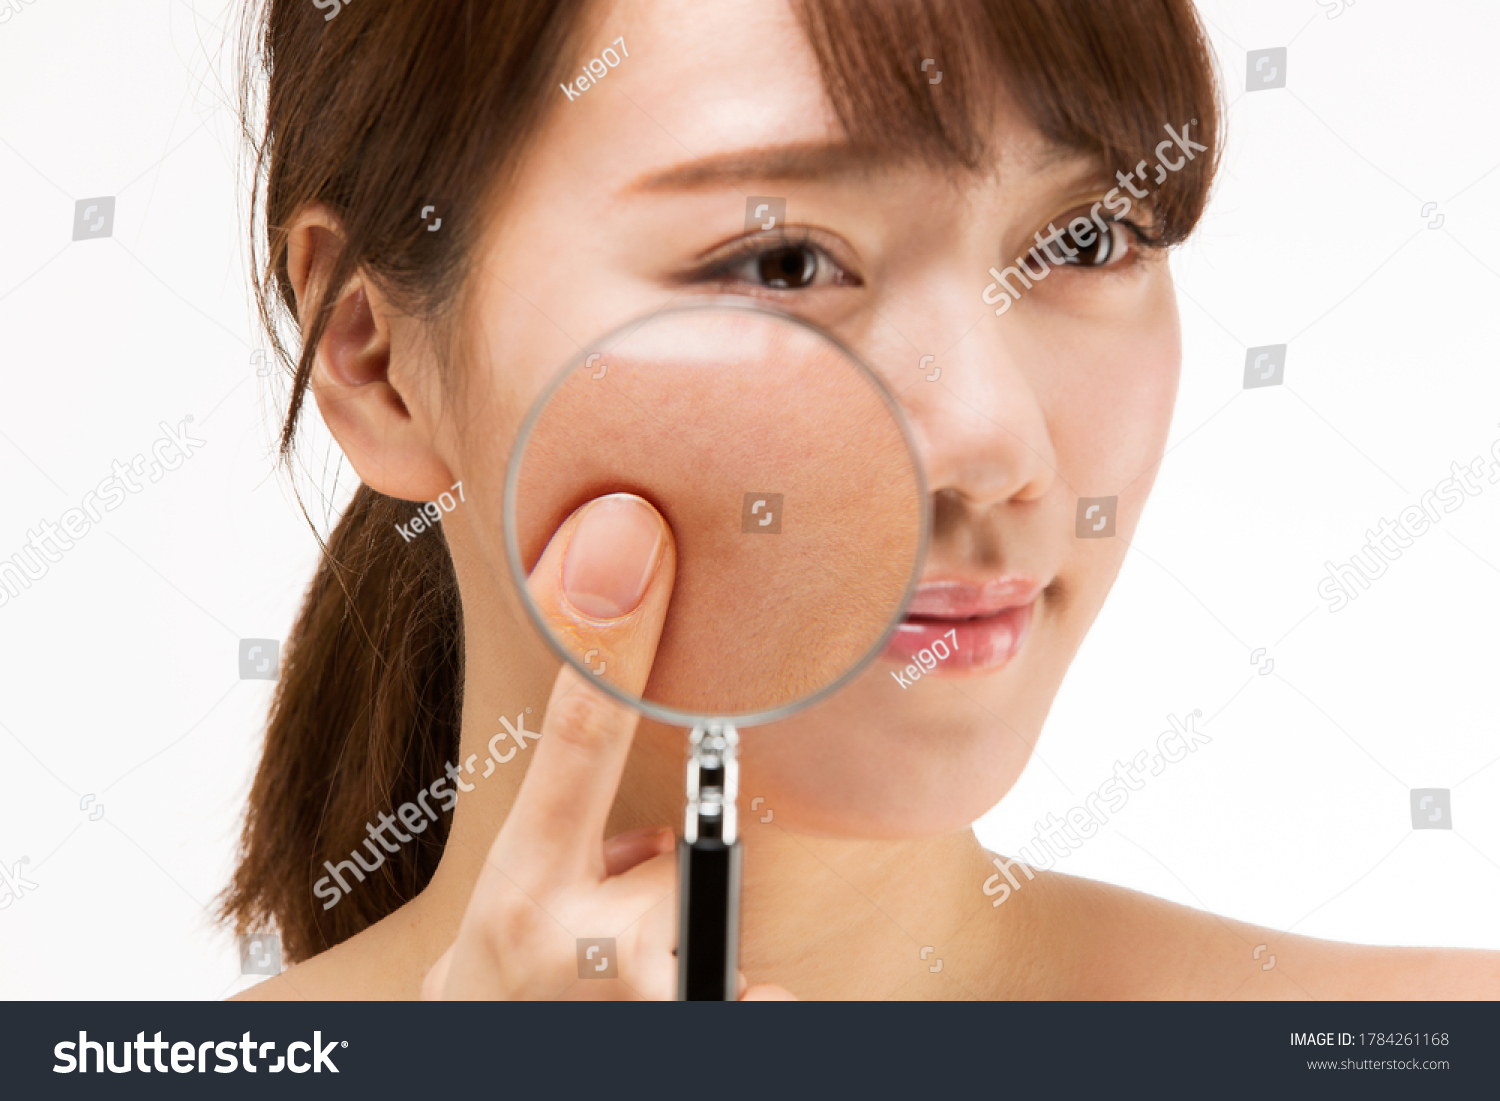 Enlarge the woman's cheeks with a magnifying glass. #1784261168